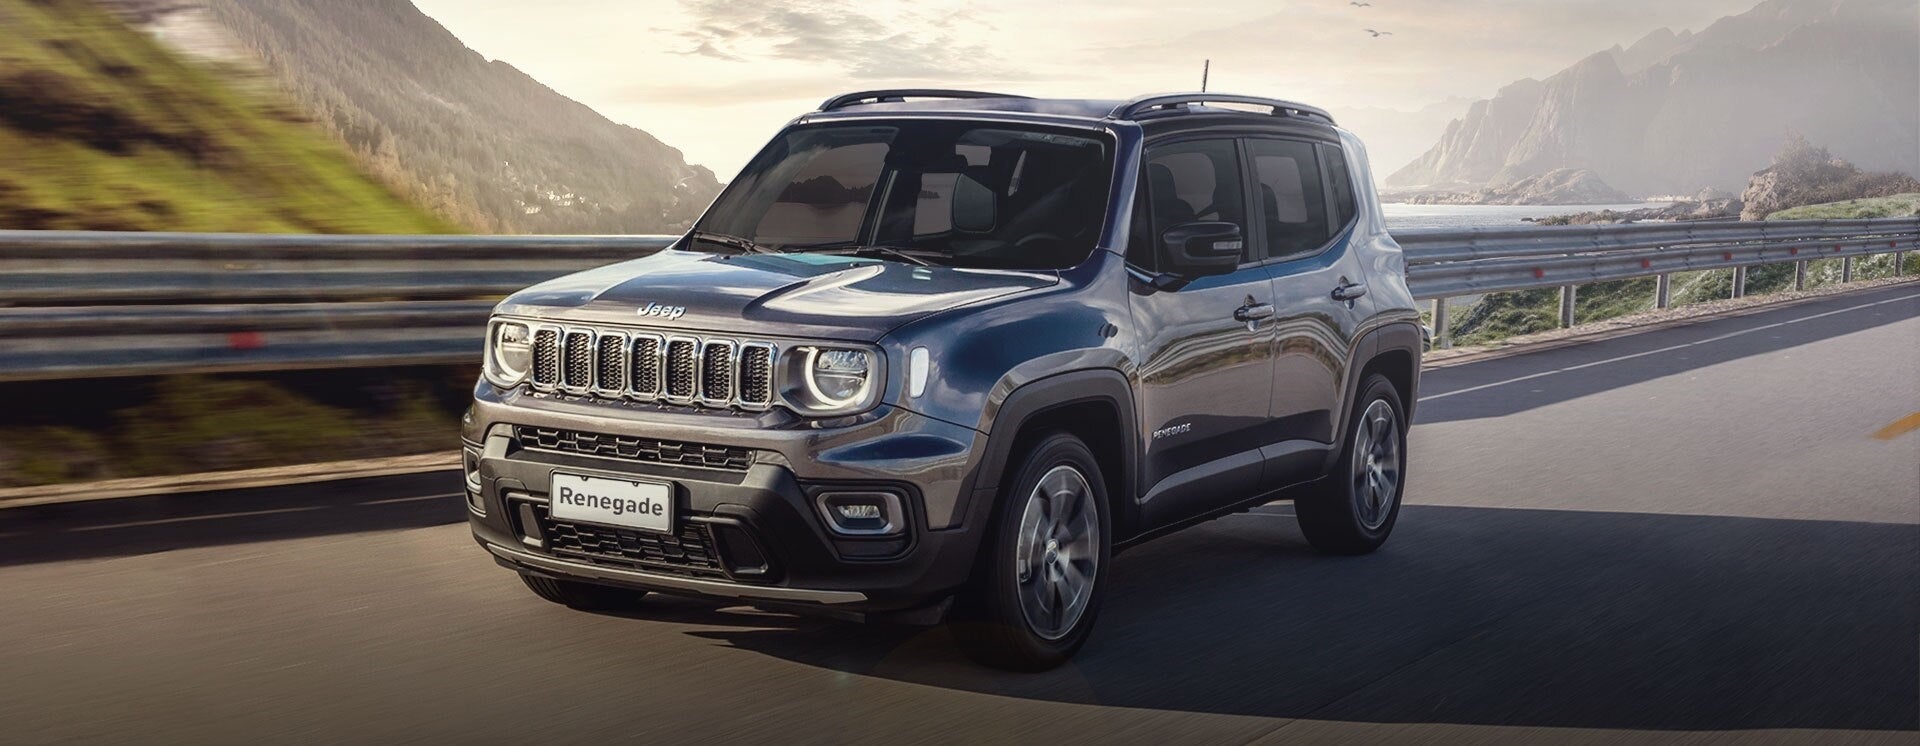 Jeep Renegade Banner